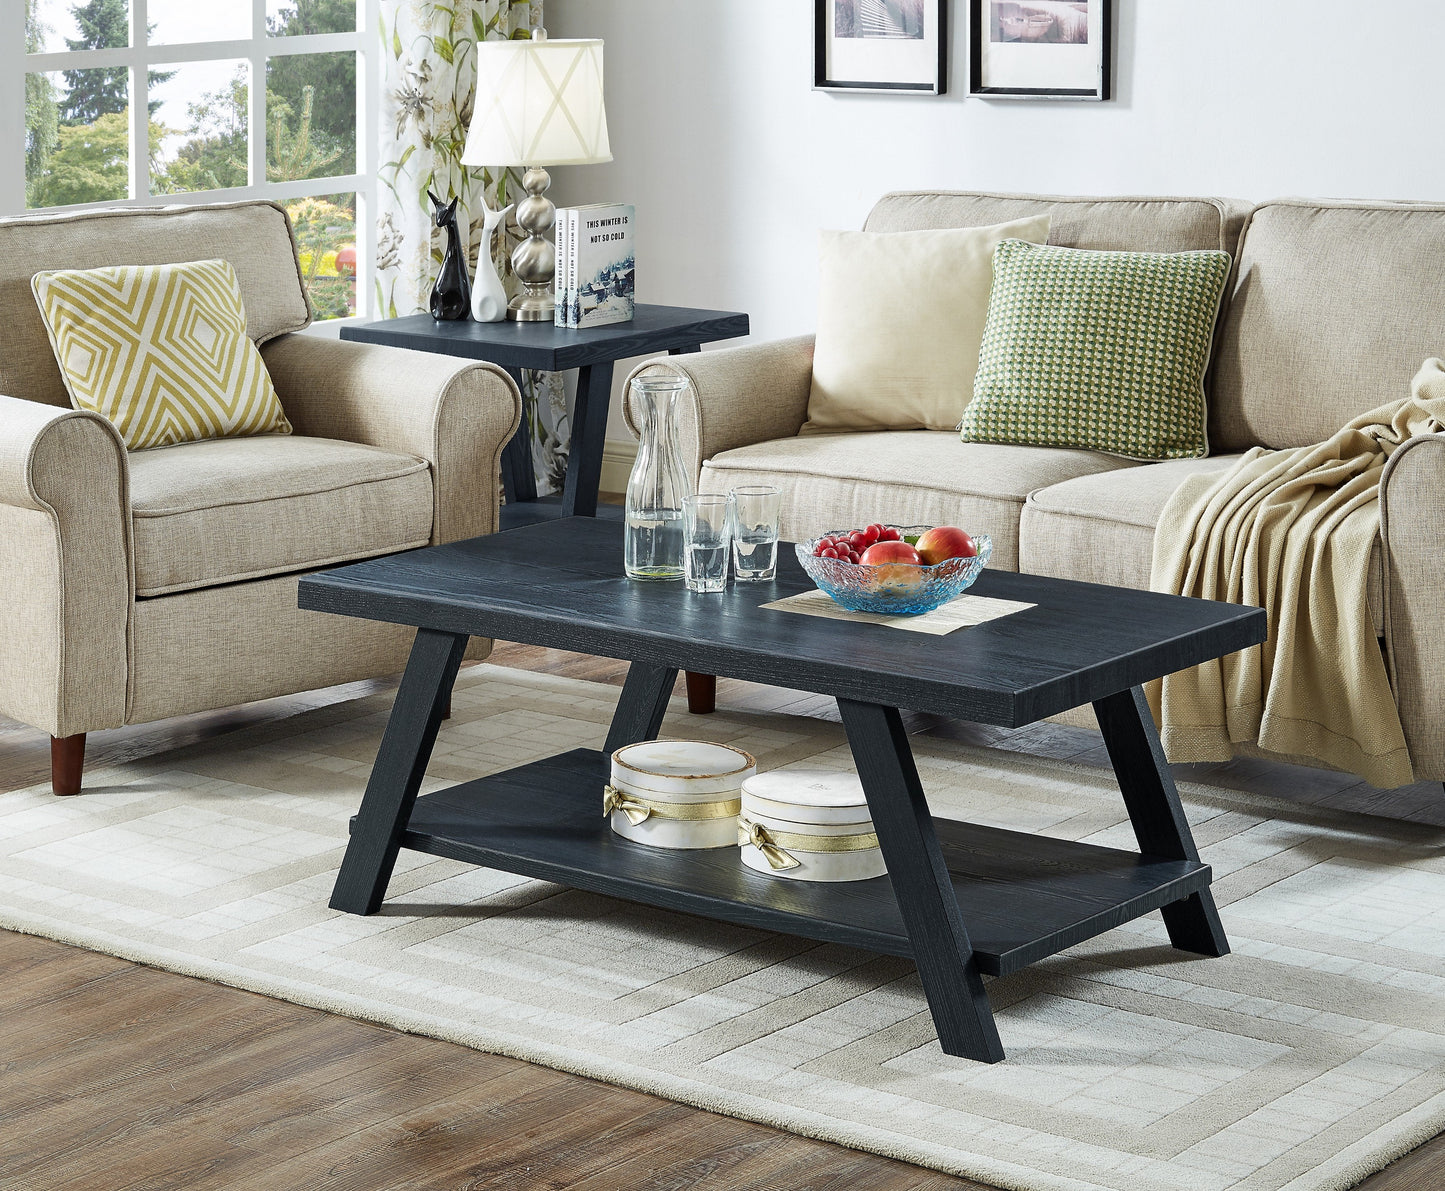 Athens Contemporary Replicated Wood Shelf Coffee Table in Black Finish